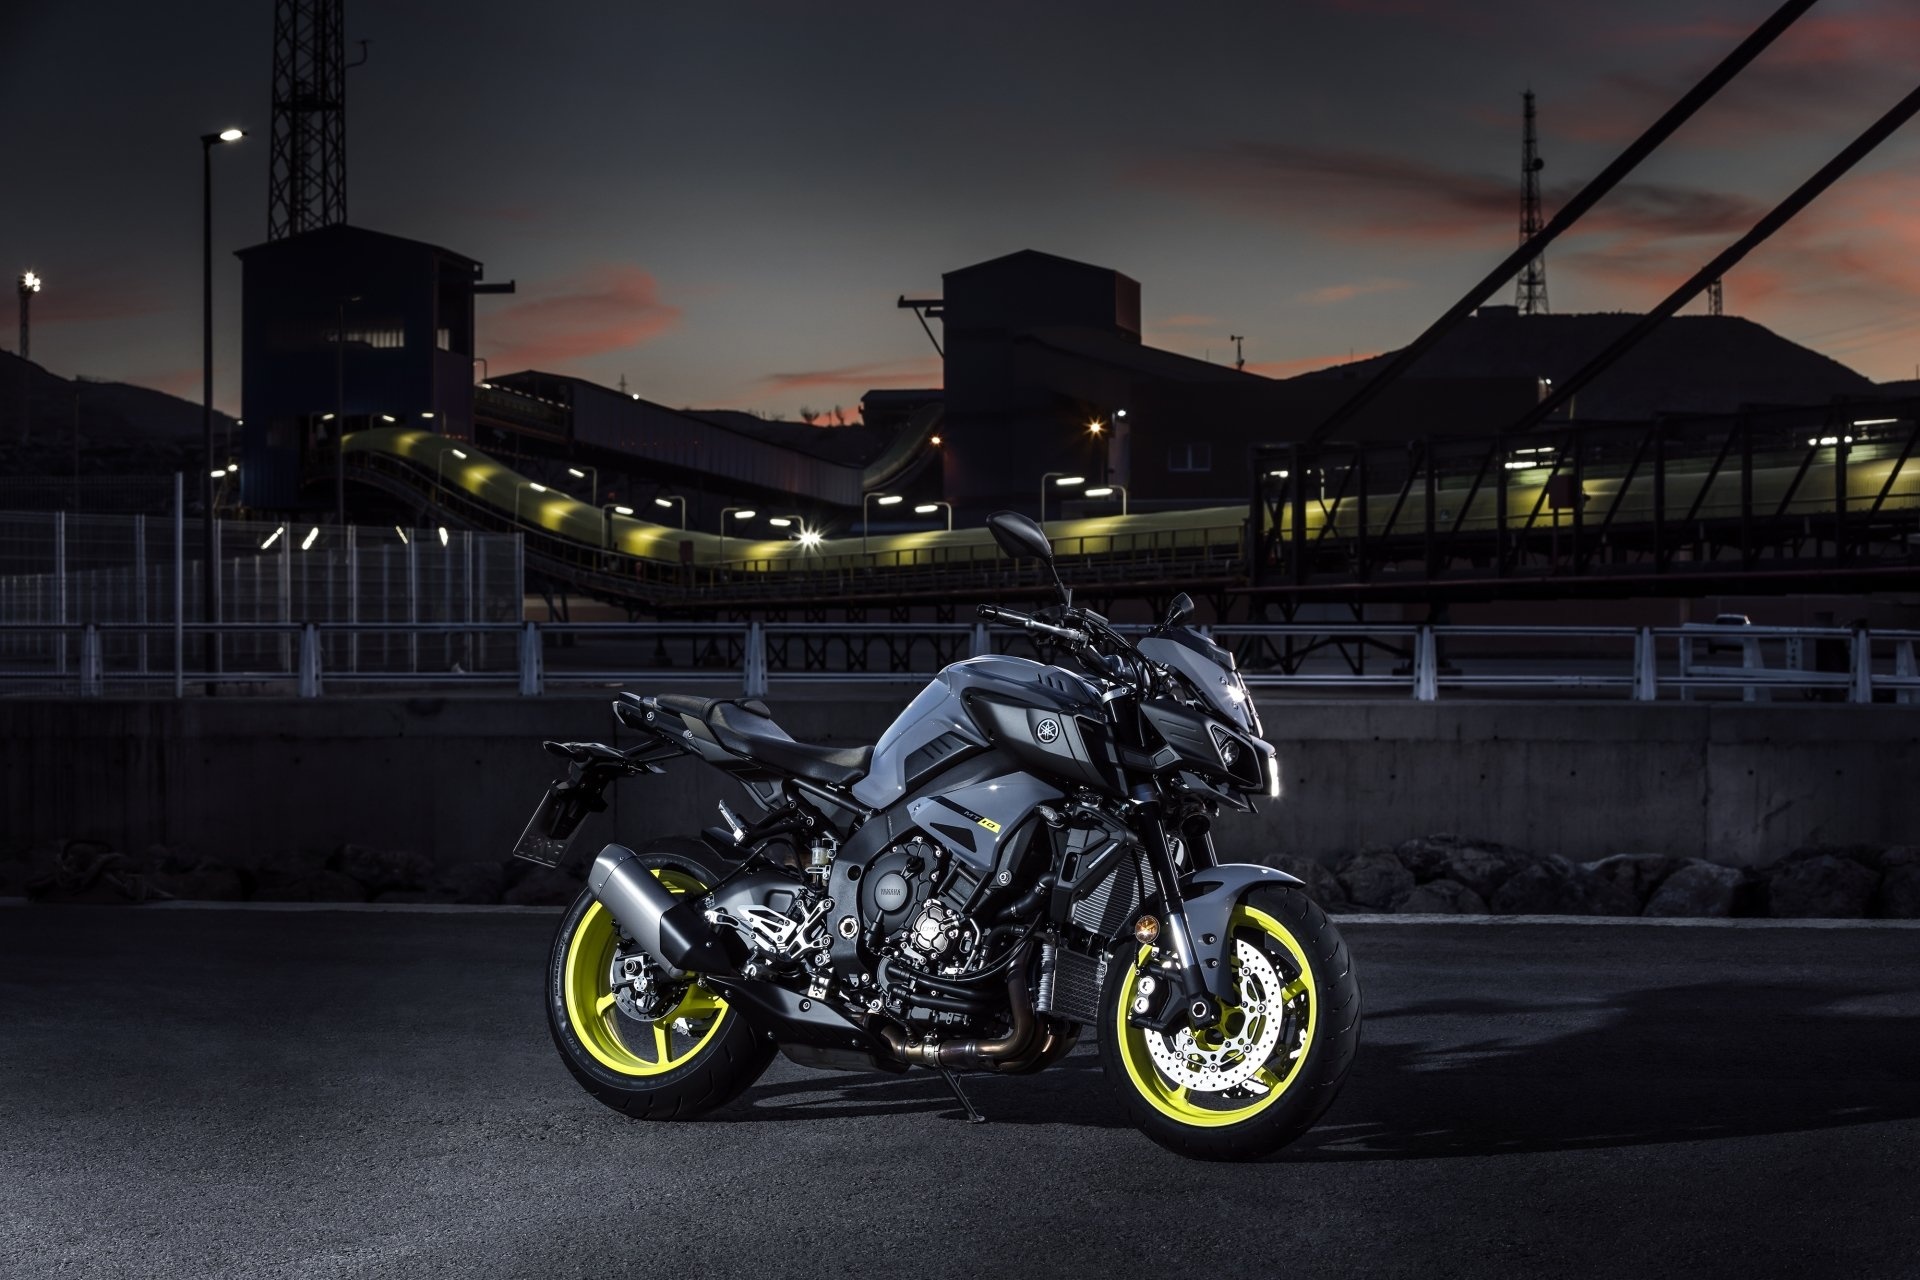 Yamaha MT-10, High-definition wallpapers, Eye-catching designs, Engineering excellence, 1920x1280 HD Desktop